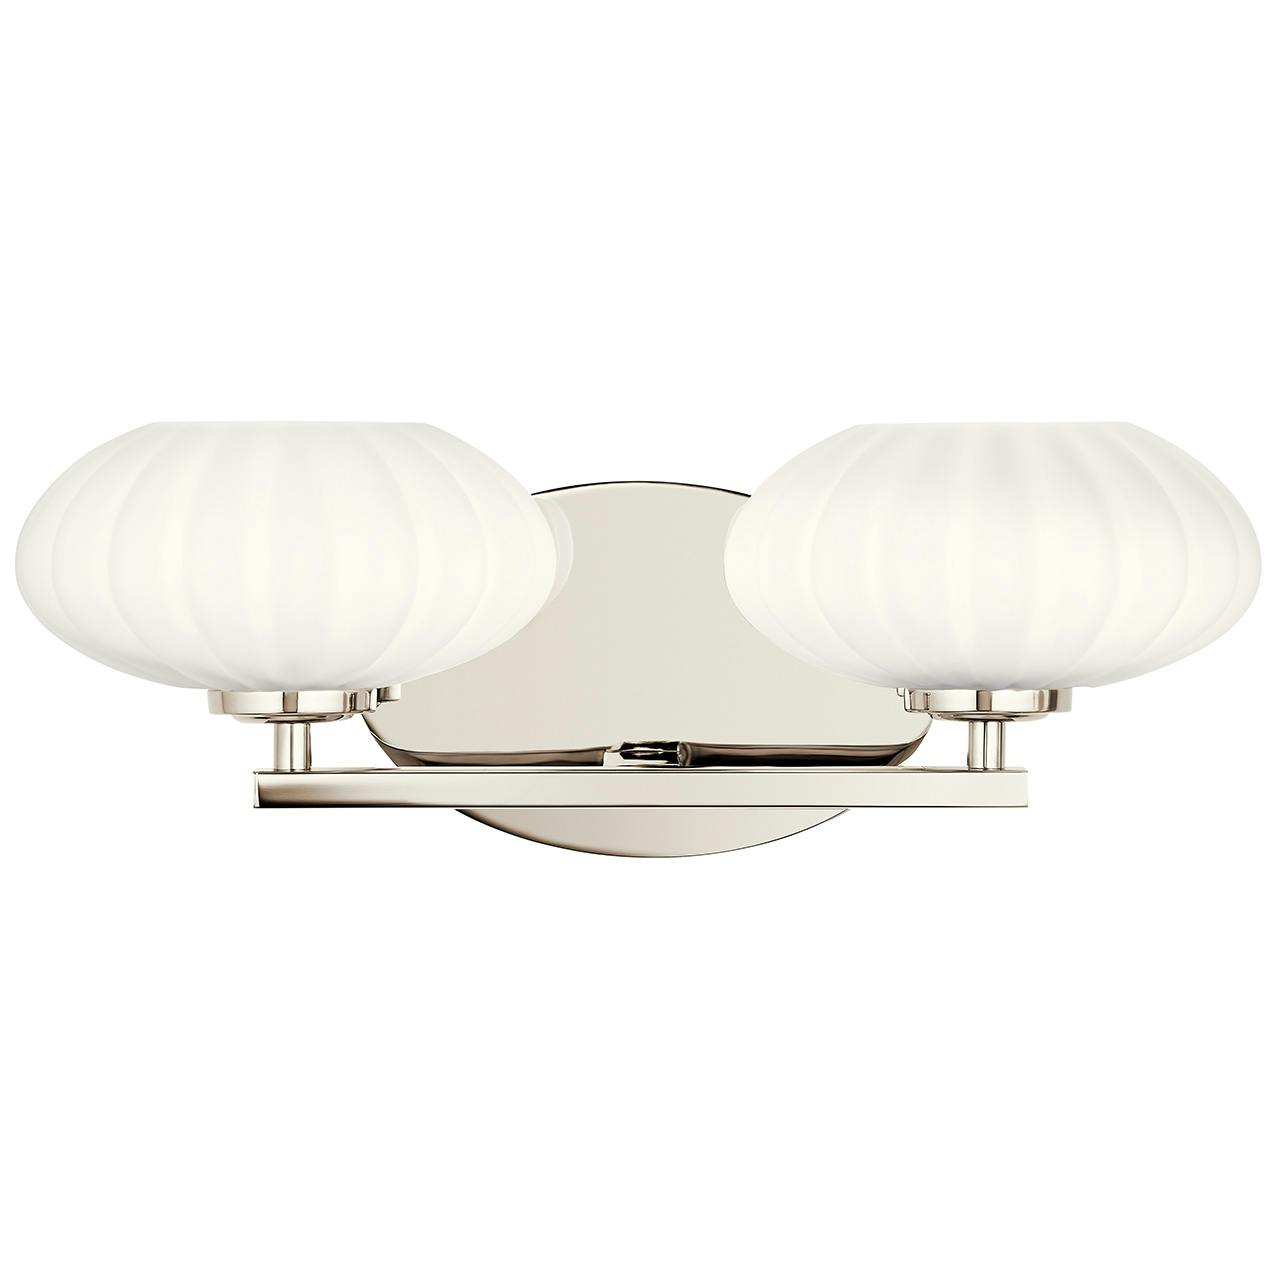 The Pim 16" 2 Light Vanity Light in Nickel facing up on a white background